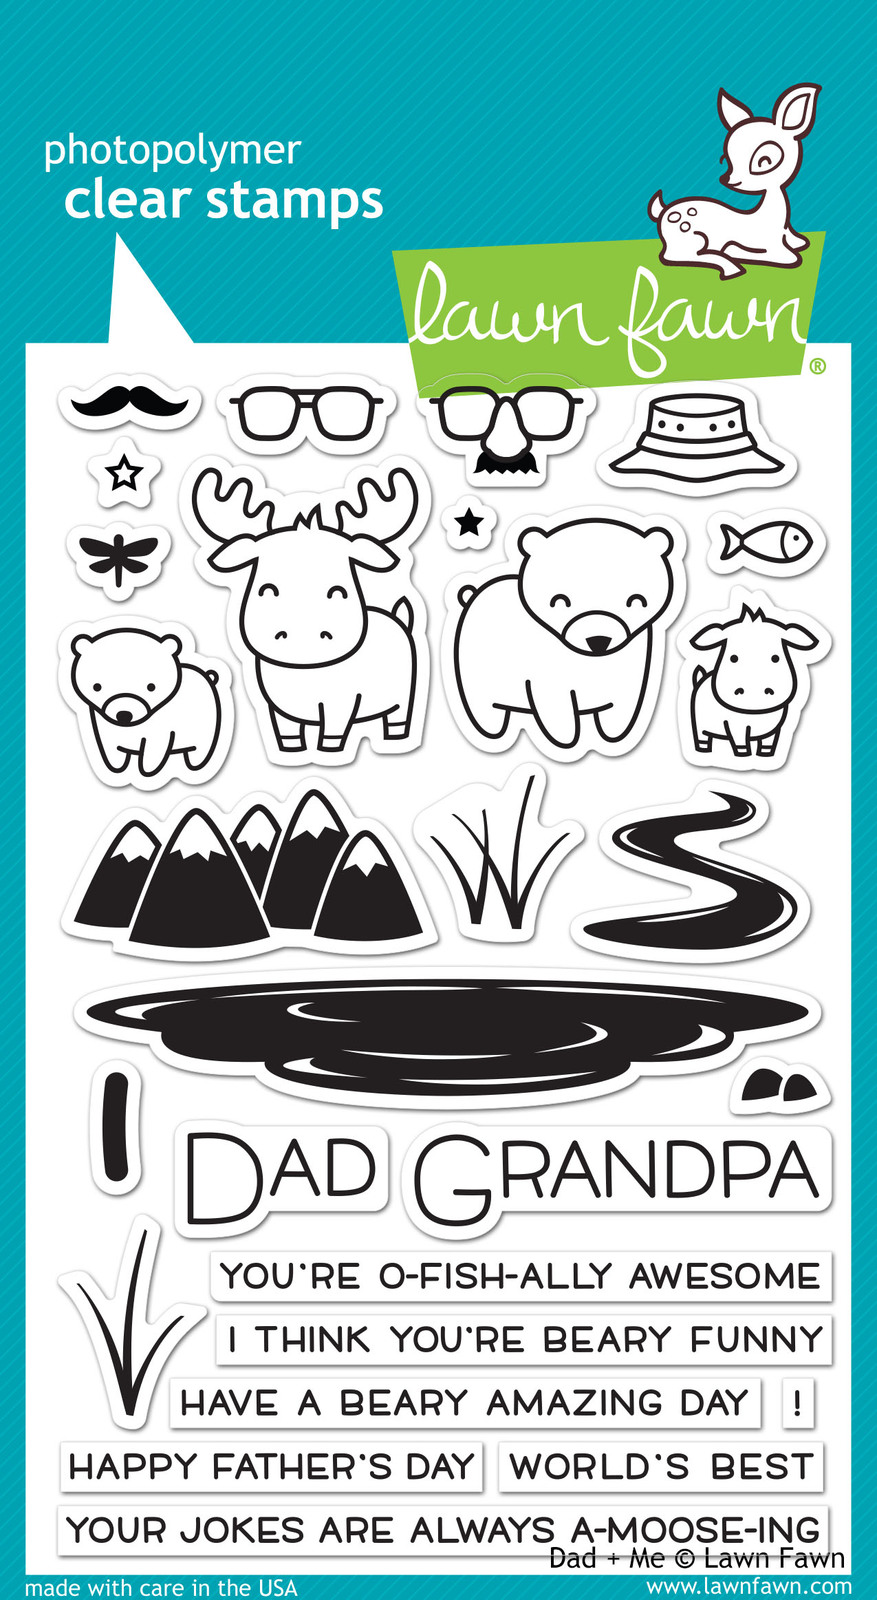 Lawn Fawn Stamps Dad + Me LF1163 